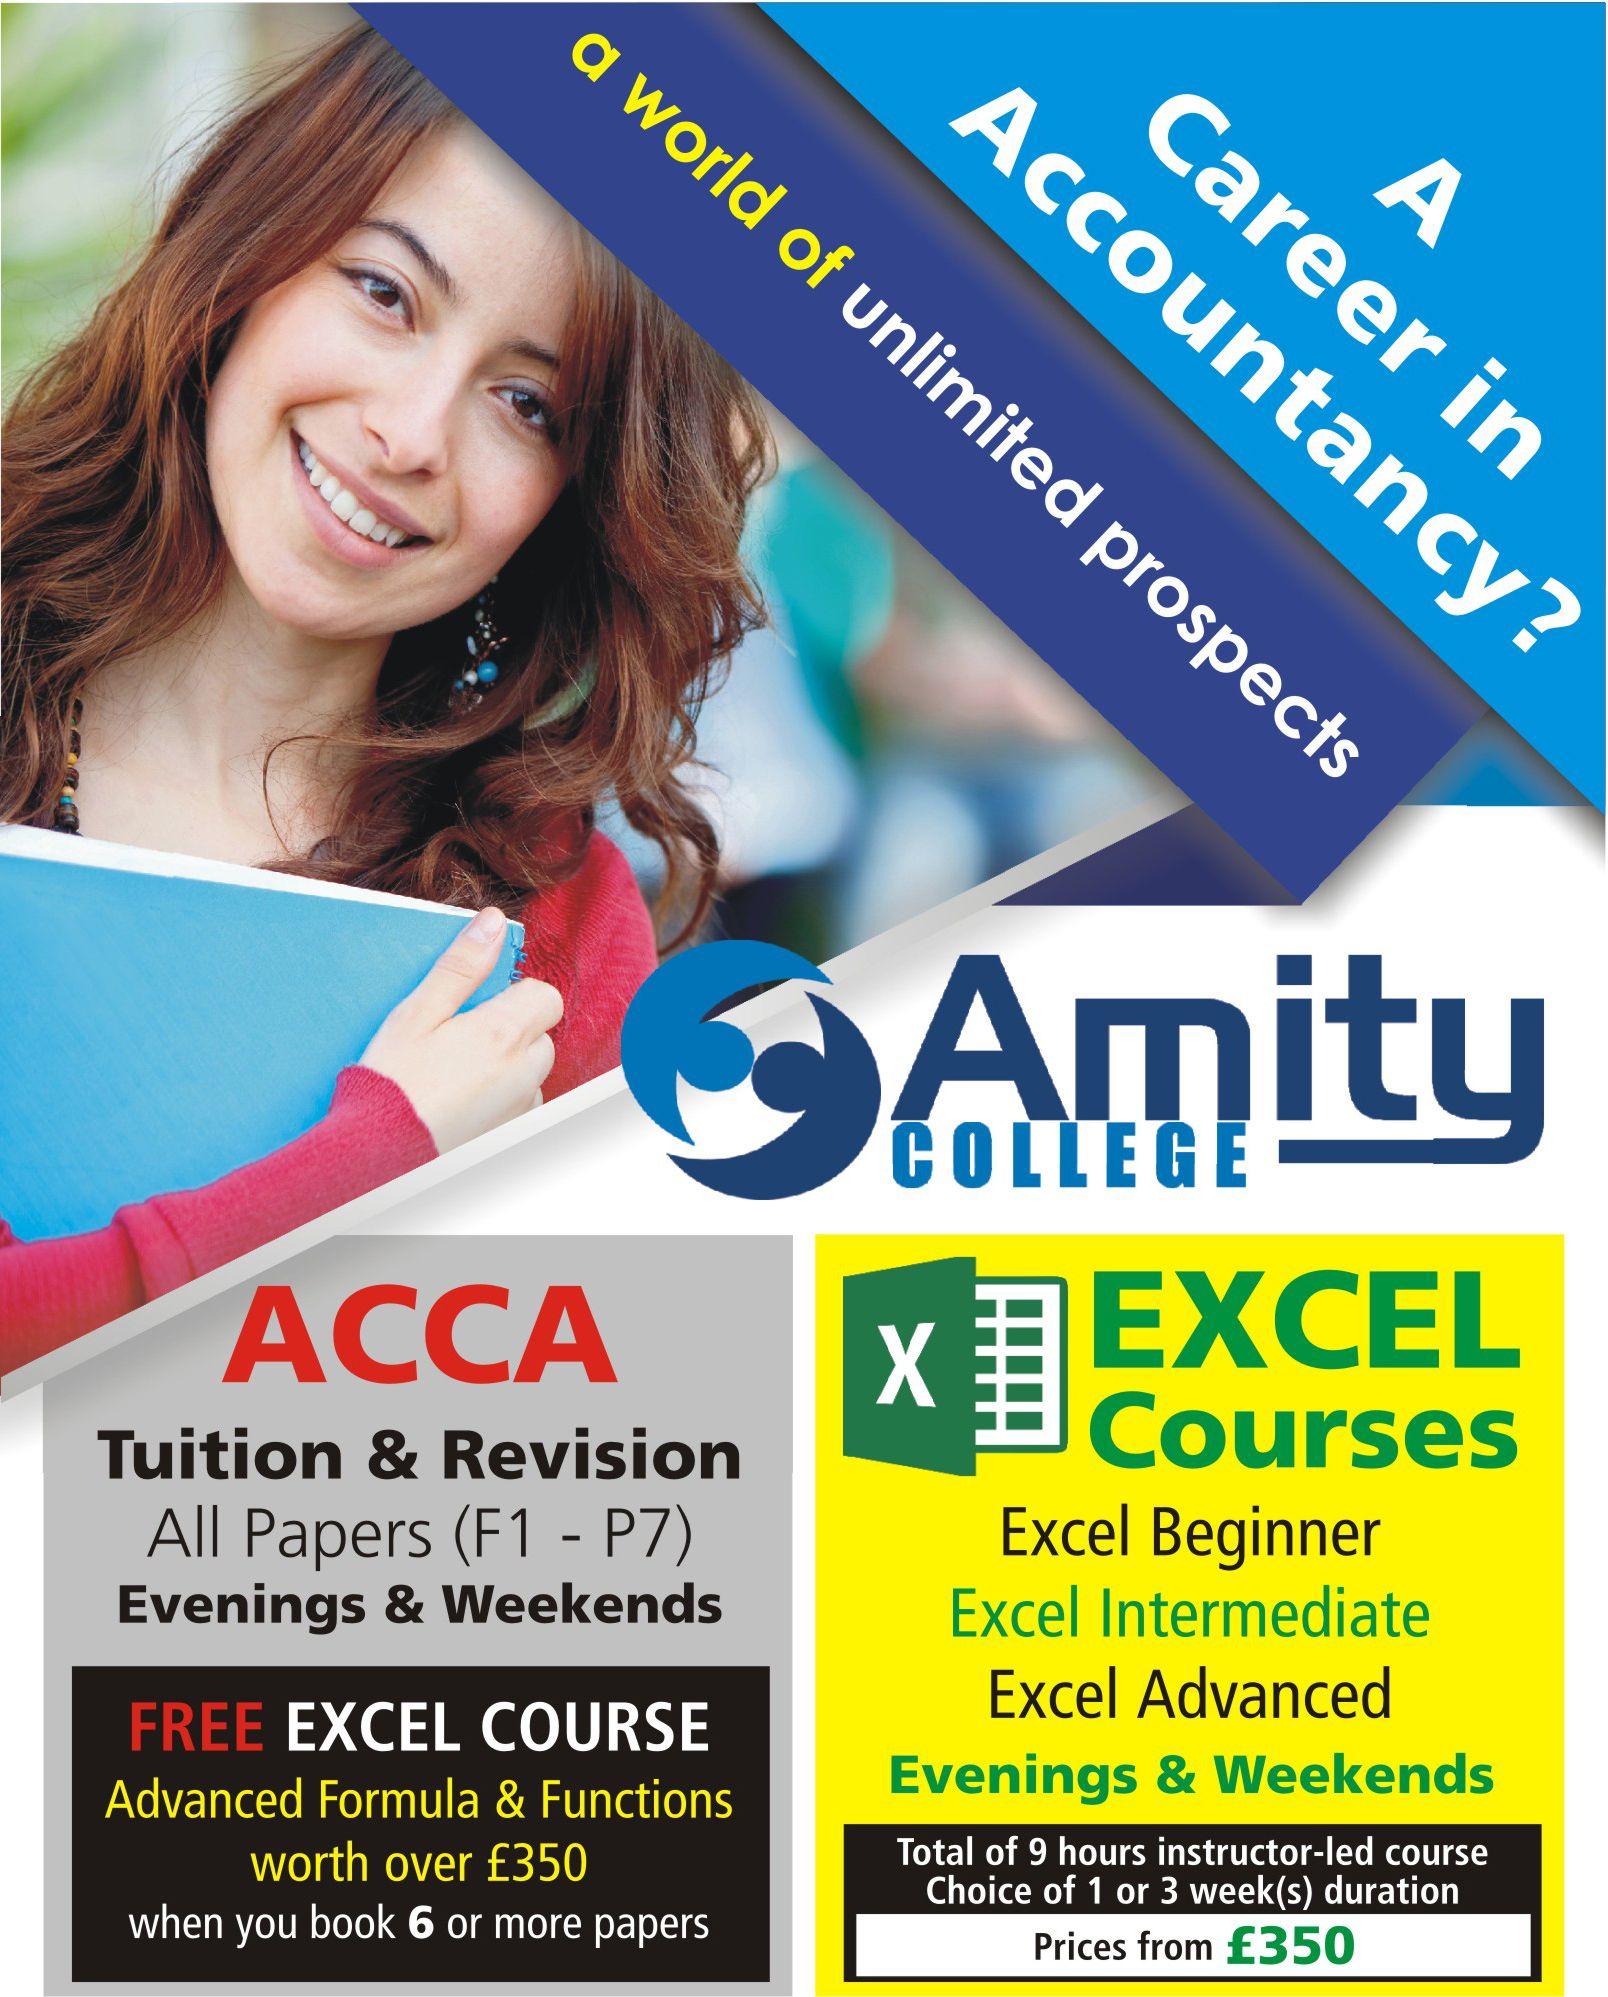 Free Excel Training Course For ACCA Students in Wimbledon